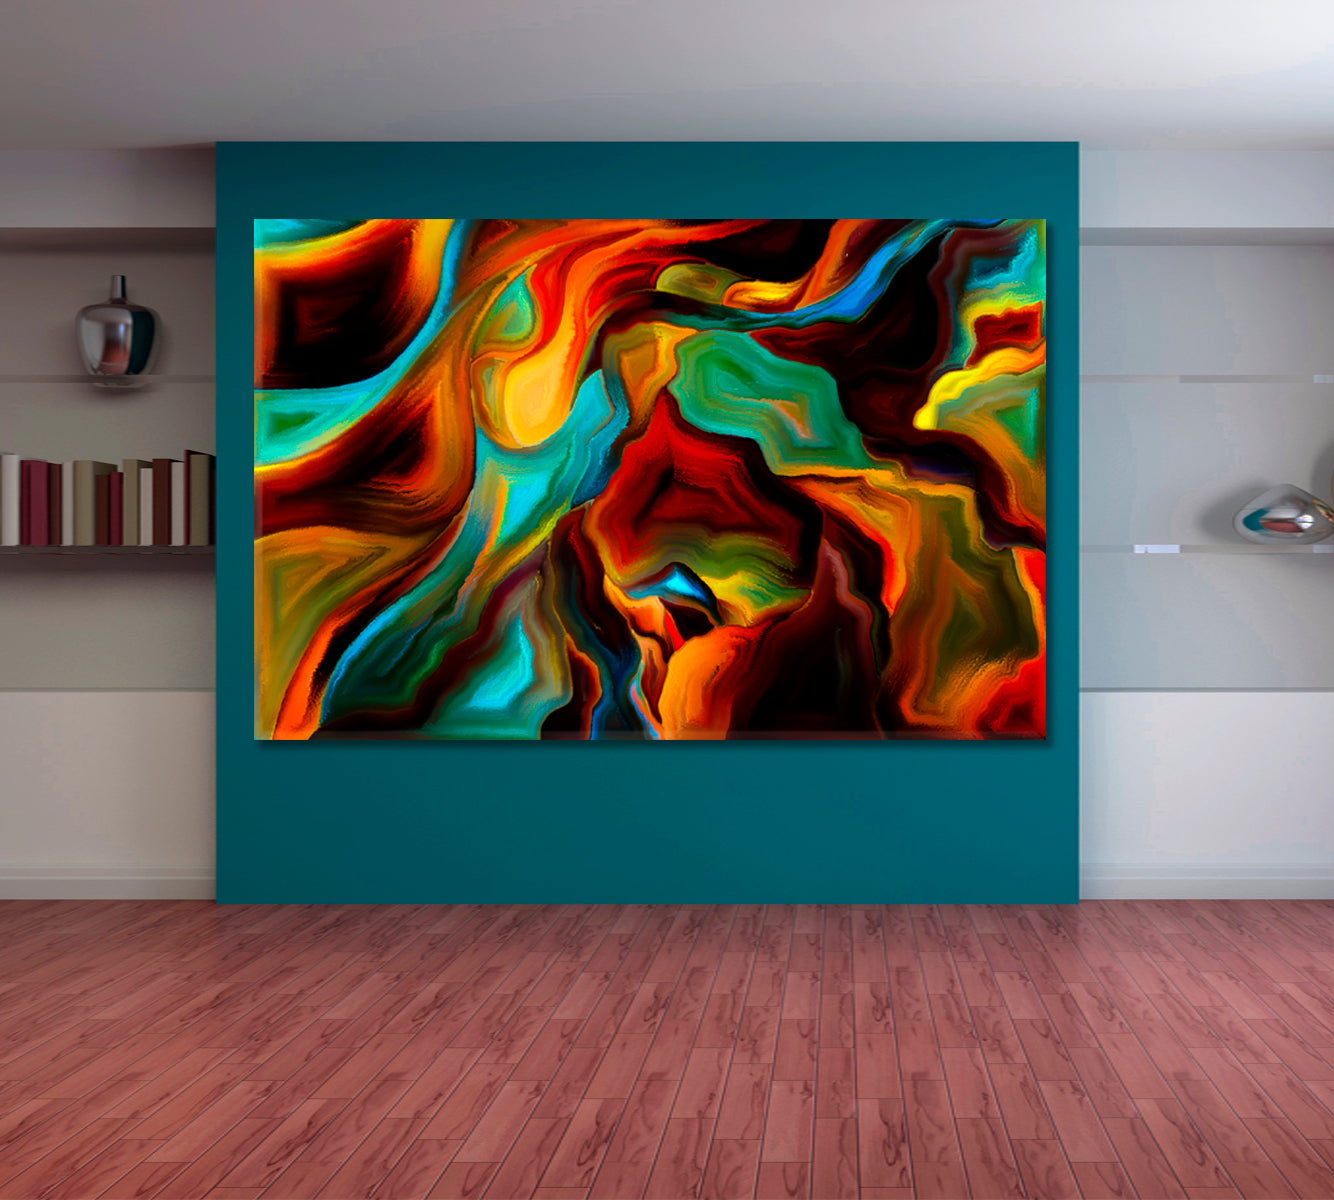 Inside Of Colors And Forms Abstract Design Abstract Art Print Artesty 1 panel 24" x 16" 